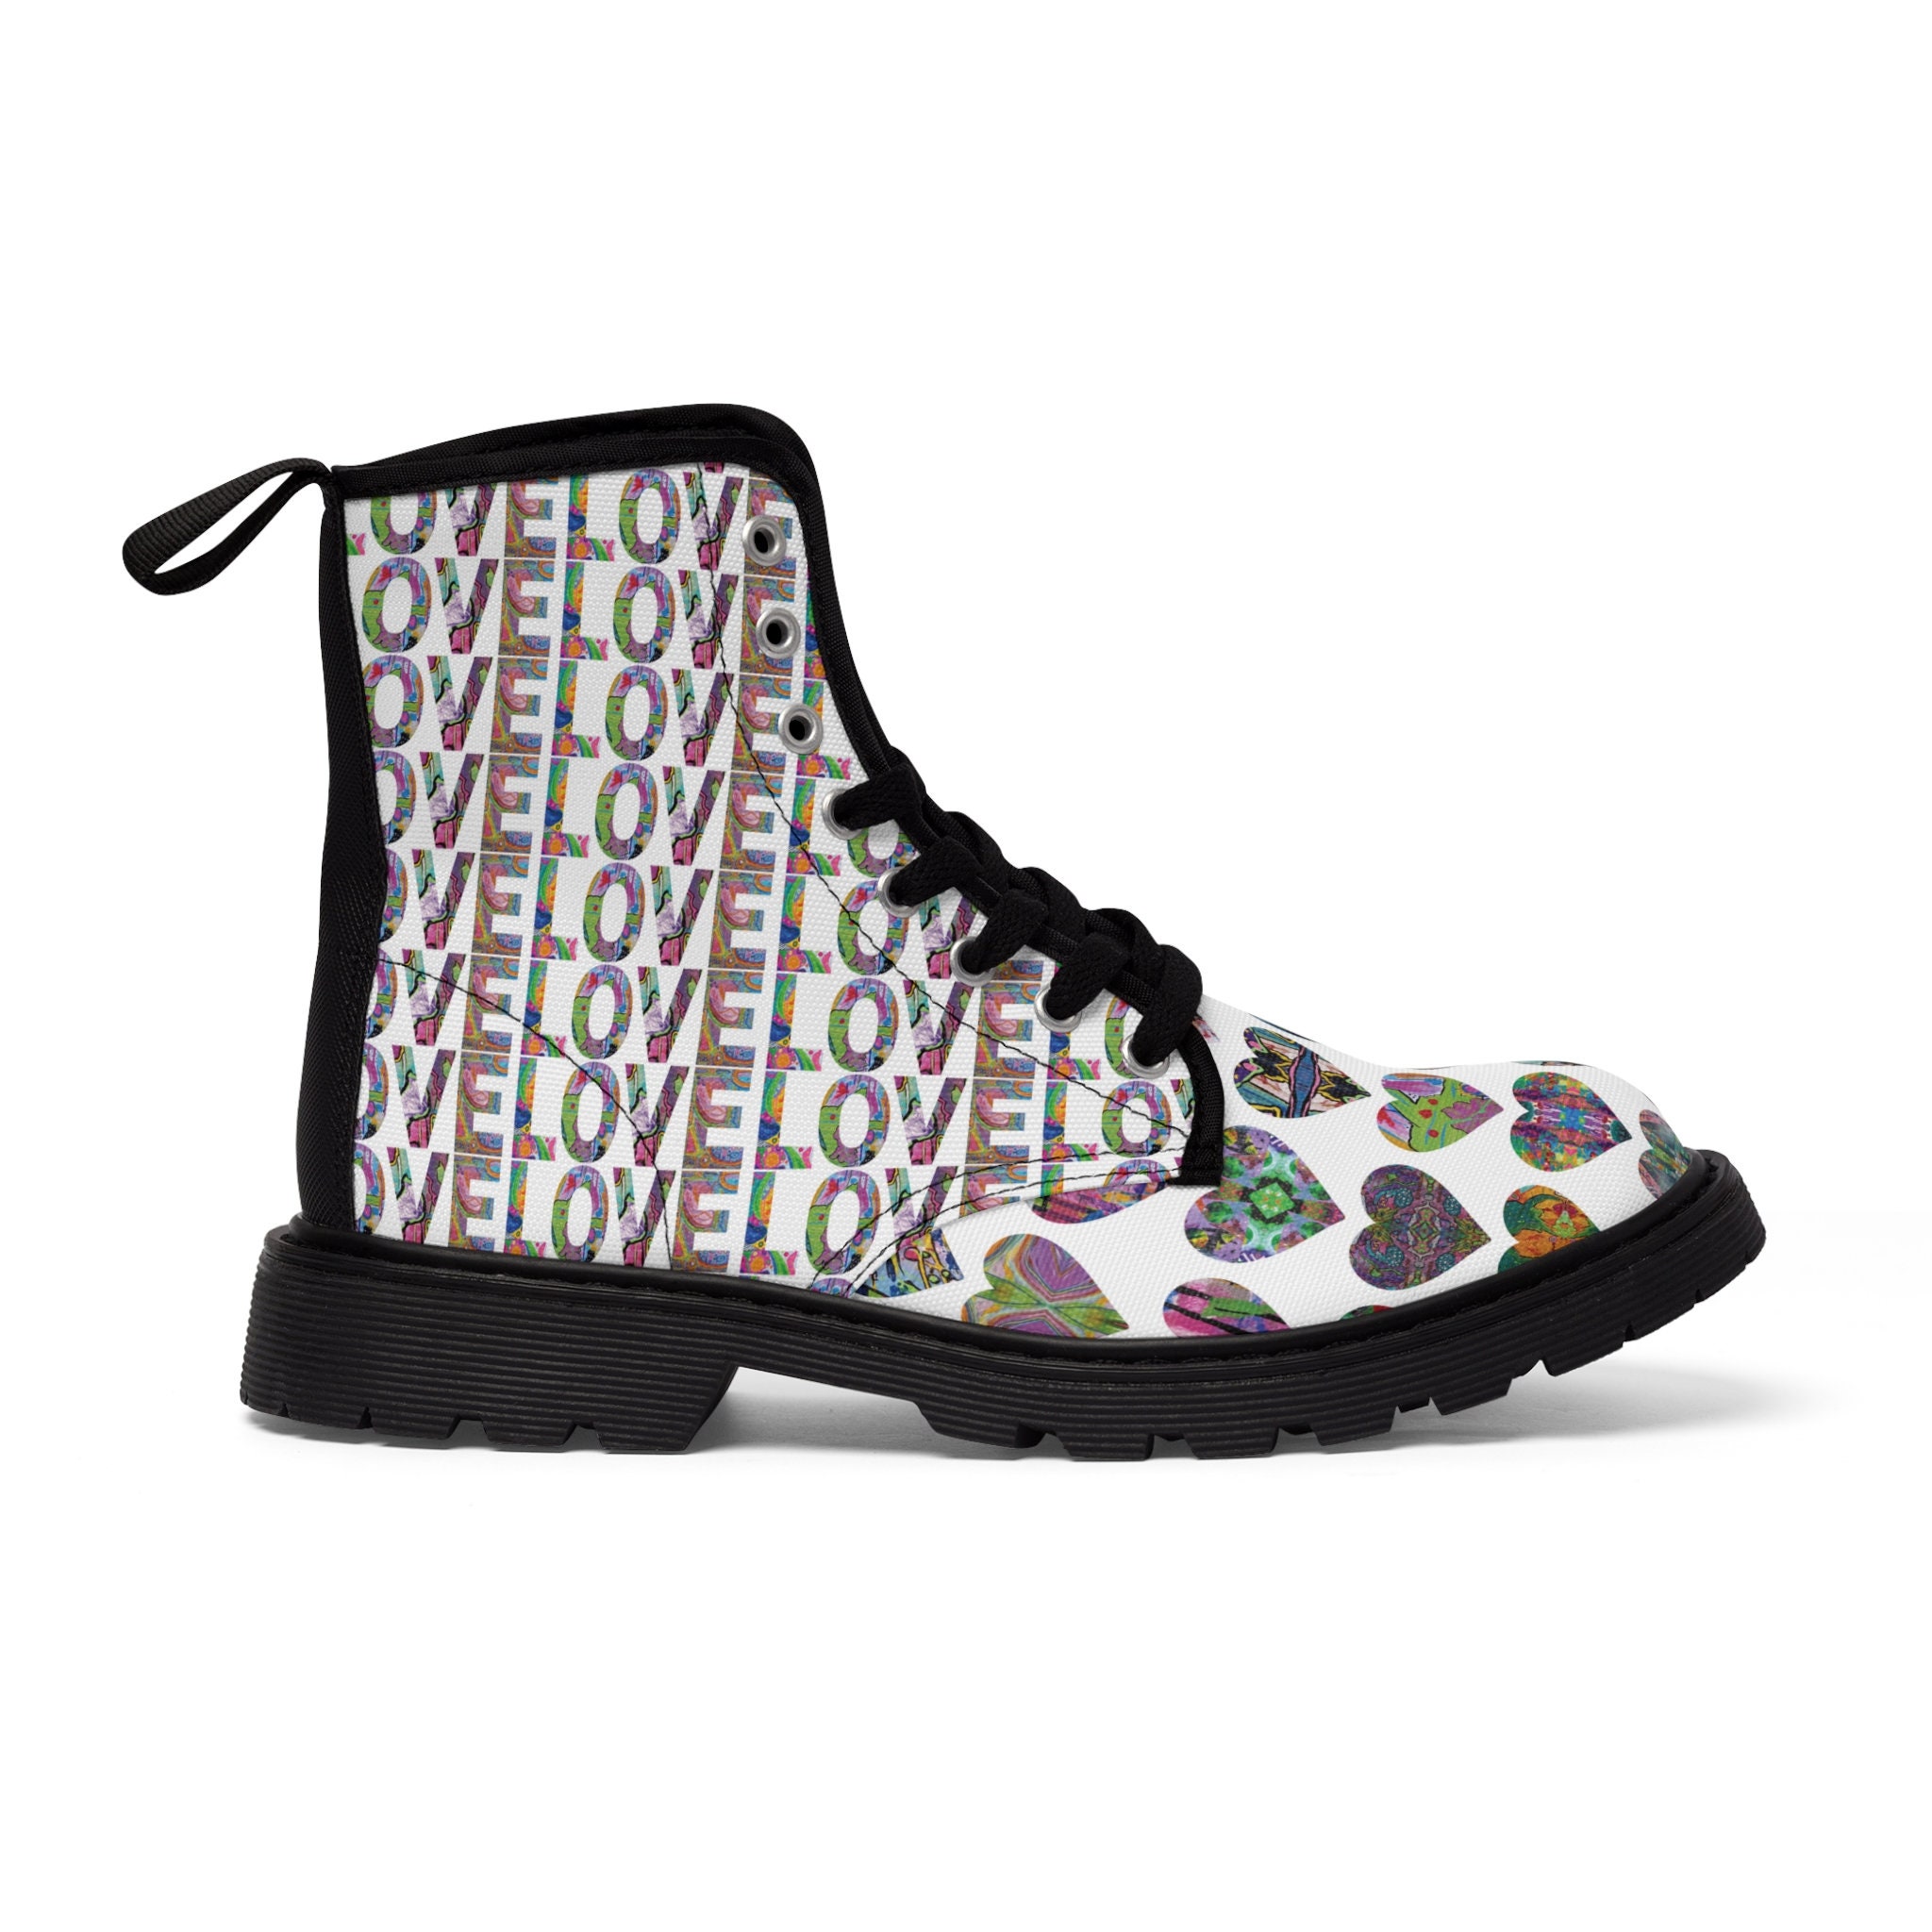 Love & Hearts Combat Boots Women's Mismatched Funky Wild Eye-catching ...